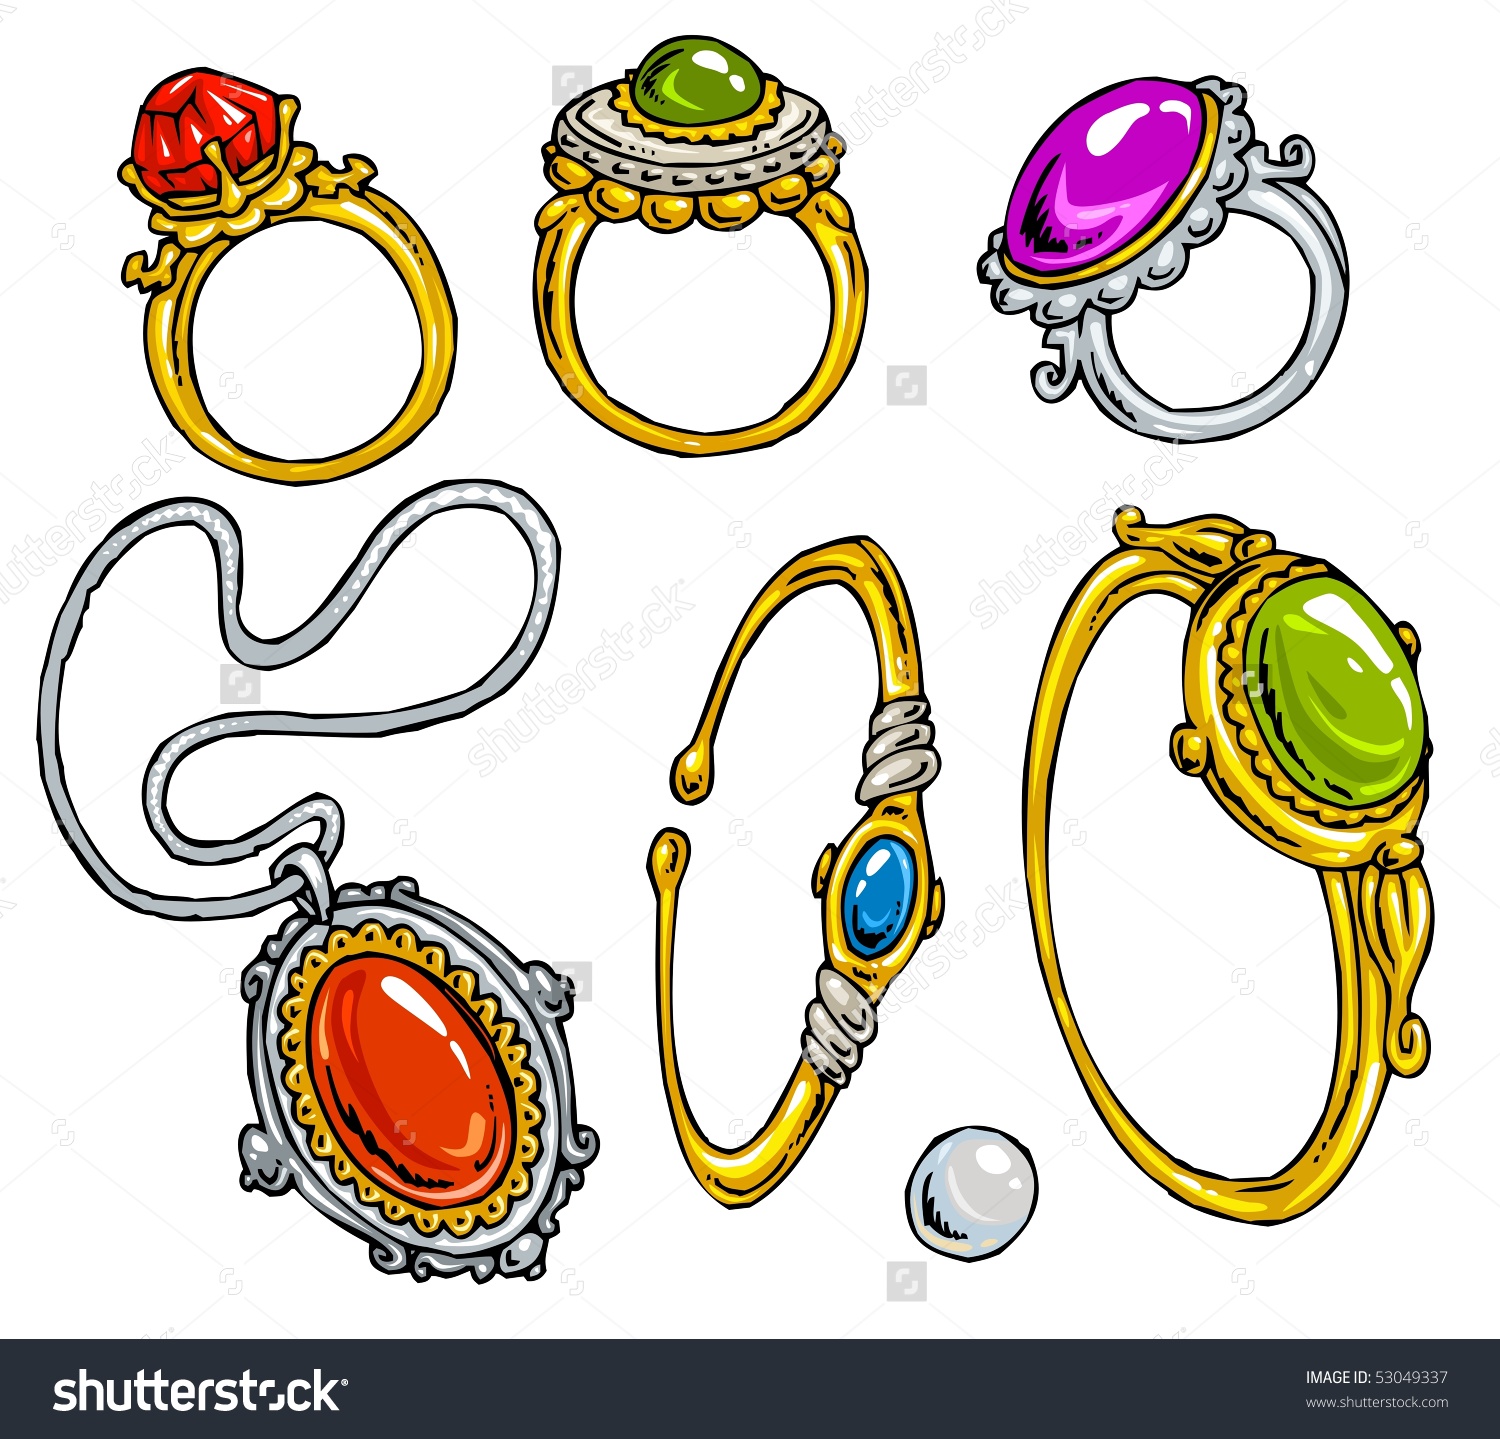 Jewelry making clipart